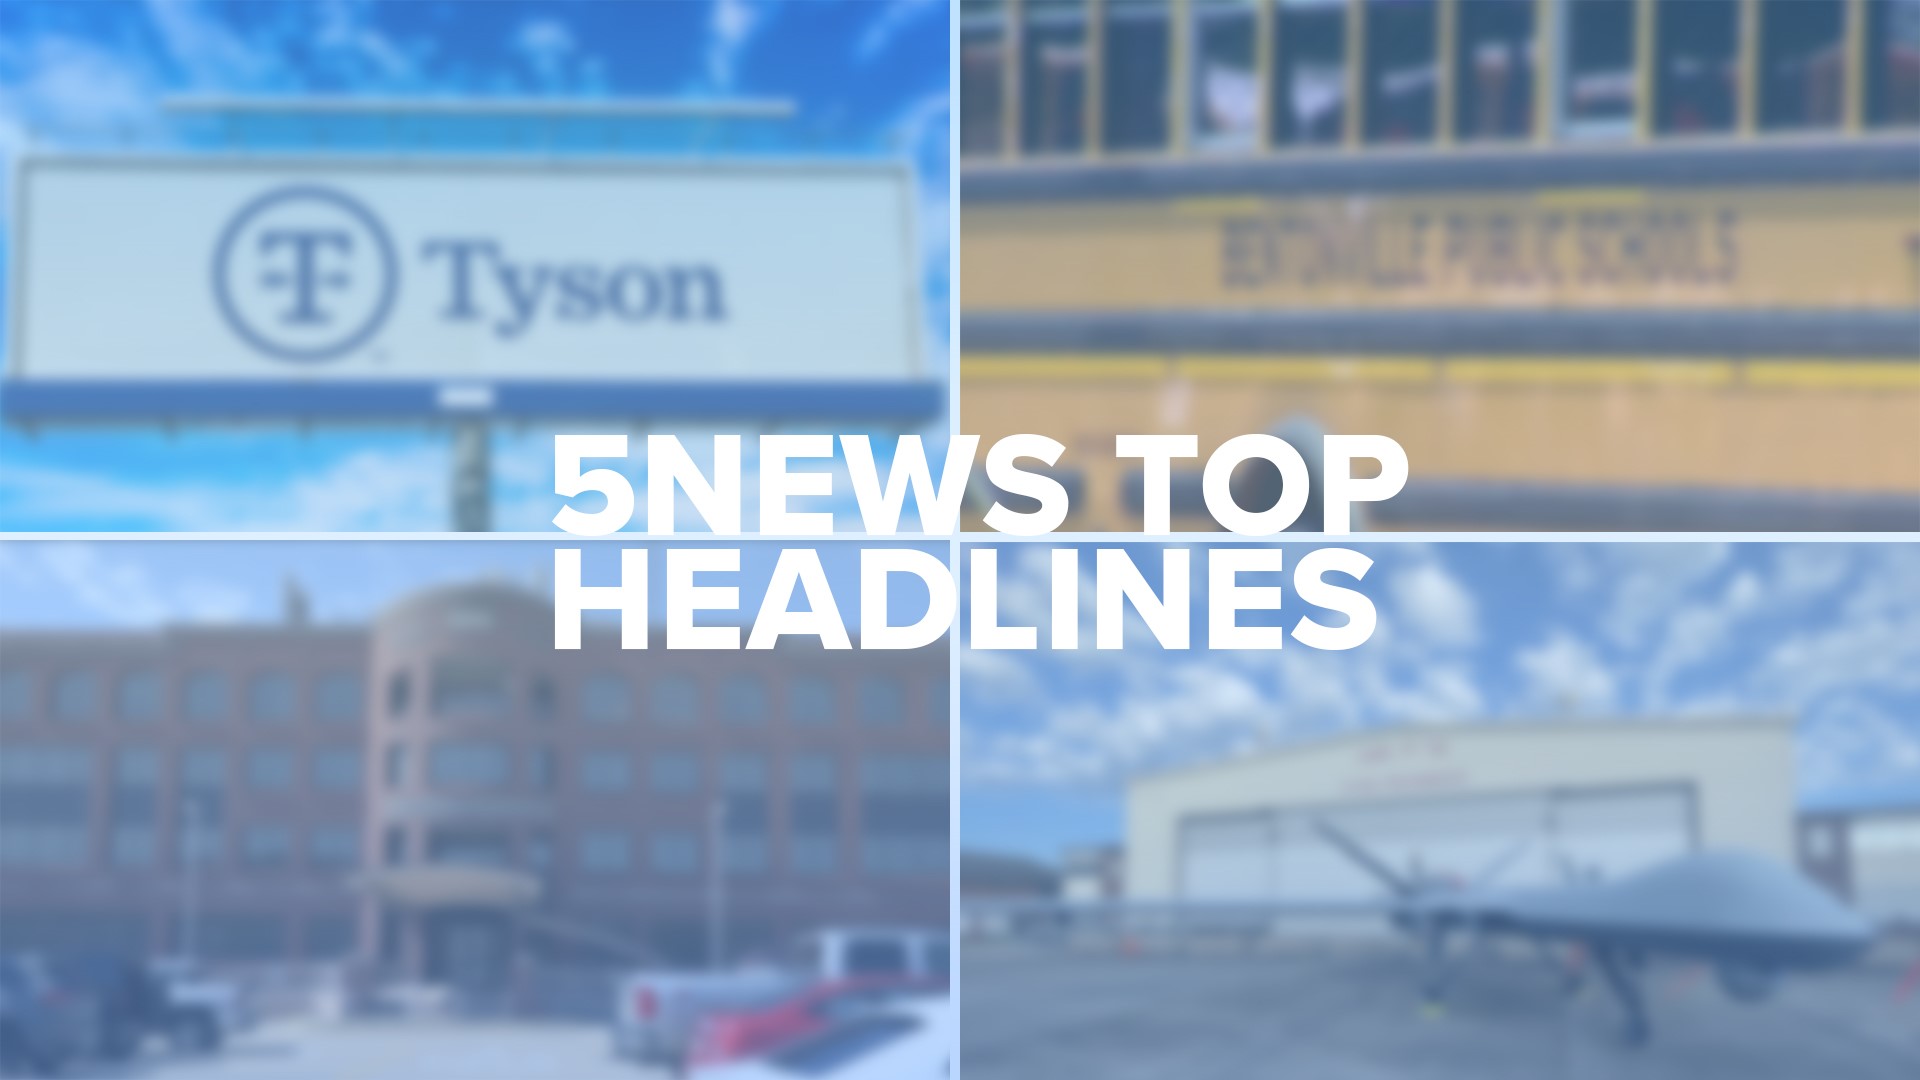 Check out today's top headlines for local news across the area.